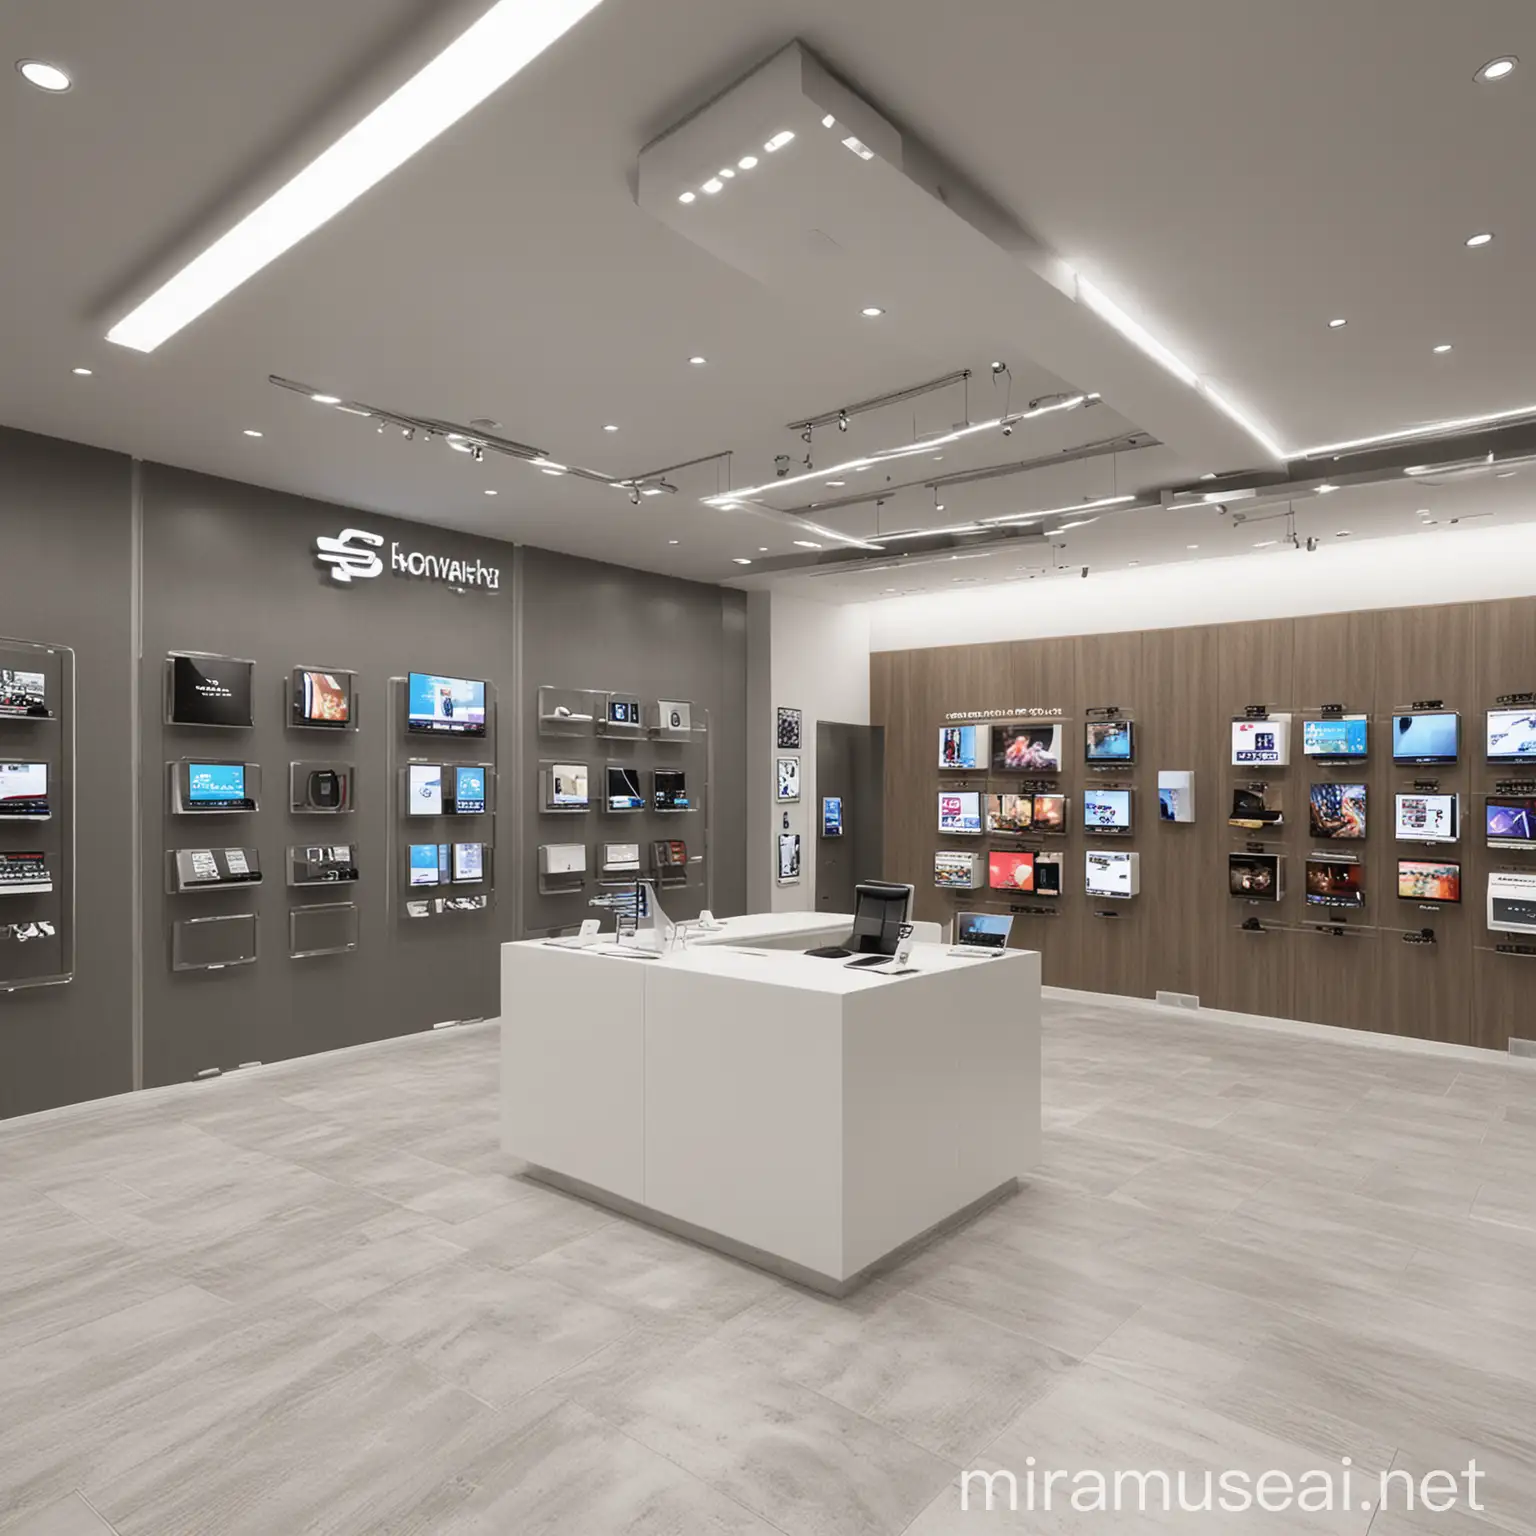 please create an interior design views  for a modern mobile phone showroom spanning 200 sqft. The showroom will showcase a diverse range of mobile phones, earphones, and smartwatches from various brands. Create an inviting and dynamic environment that highlights the latest technology trends while ensuring each product category receives adequate attention. Incorporate innovative display solutions, interactive product demonstrations, and designated areas for customer consultations. The showroom should reflect a contemporary aesthetic, with sleek finishes and technology-integrated features that enhance the overall shopping experience. Consider the flow of traffic, branding elements, and seamless integration of digital and physical retail experiences within the space.